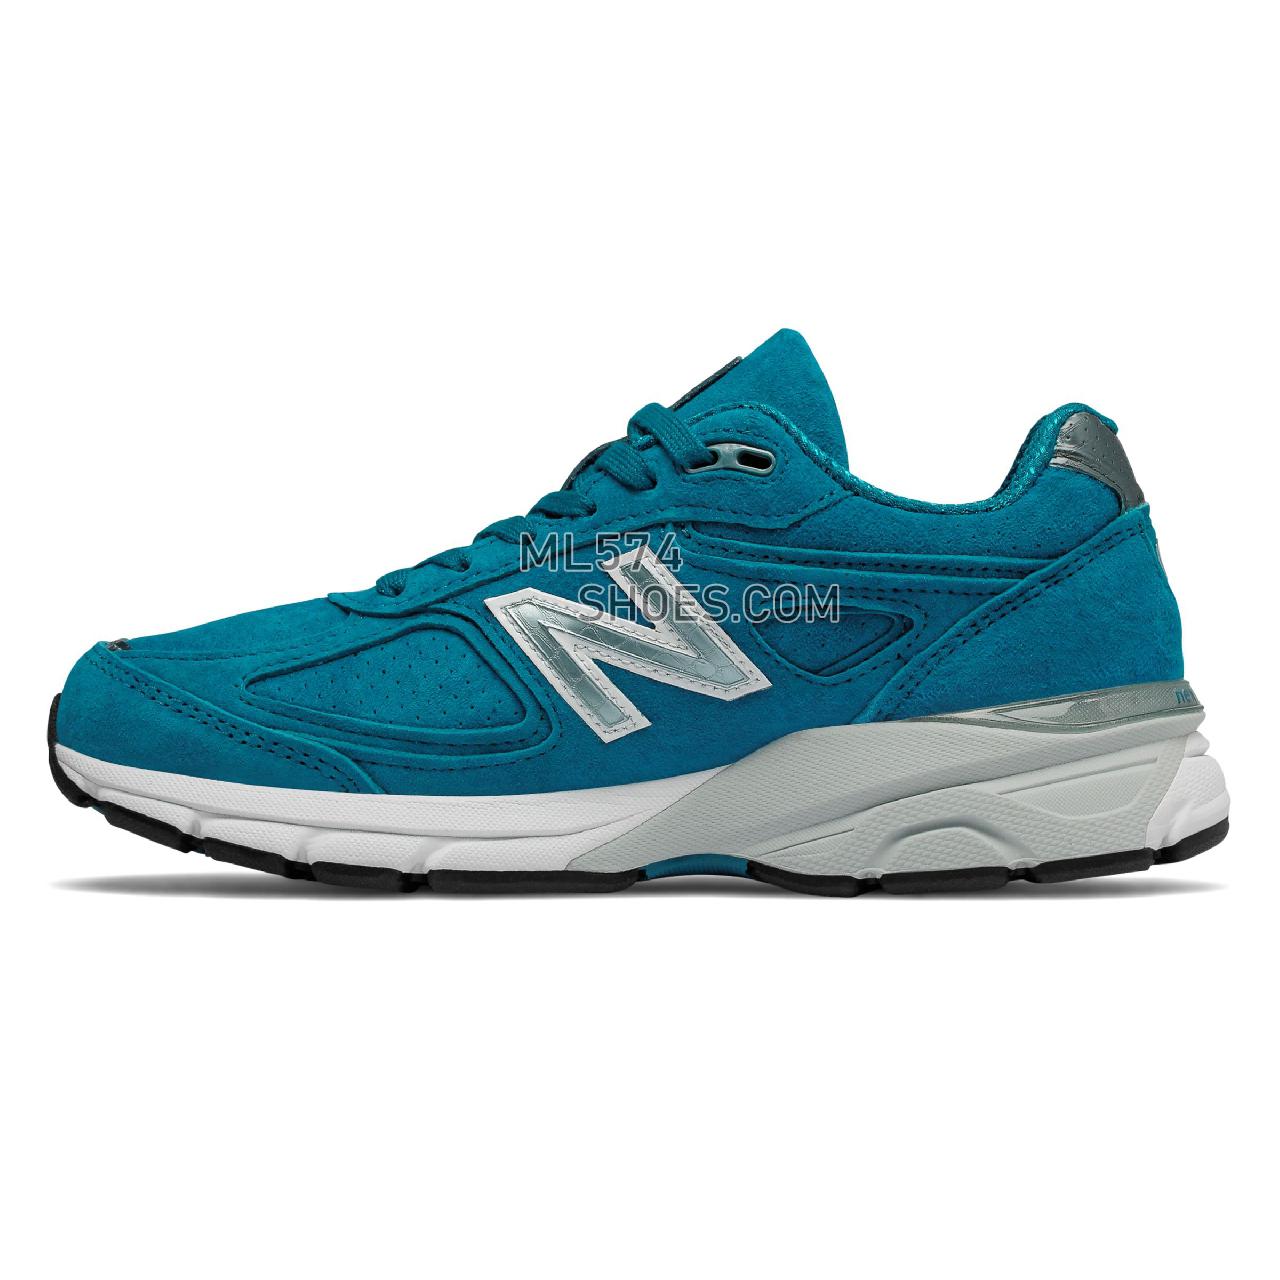 New Balance Womens 990v4 Made in US - Women's 990 - Running Lake Blue with Silver - W990LB4